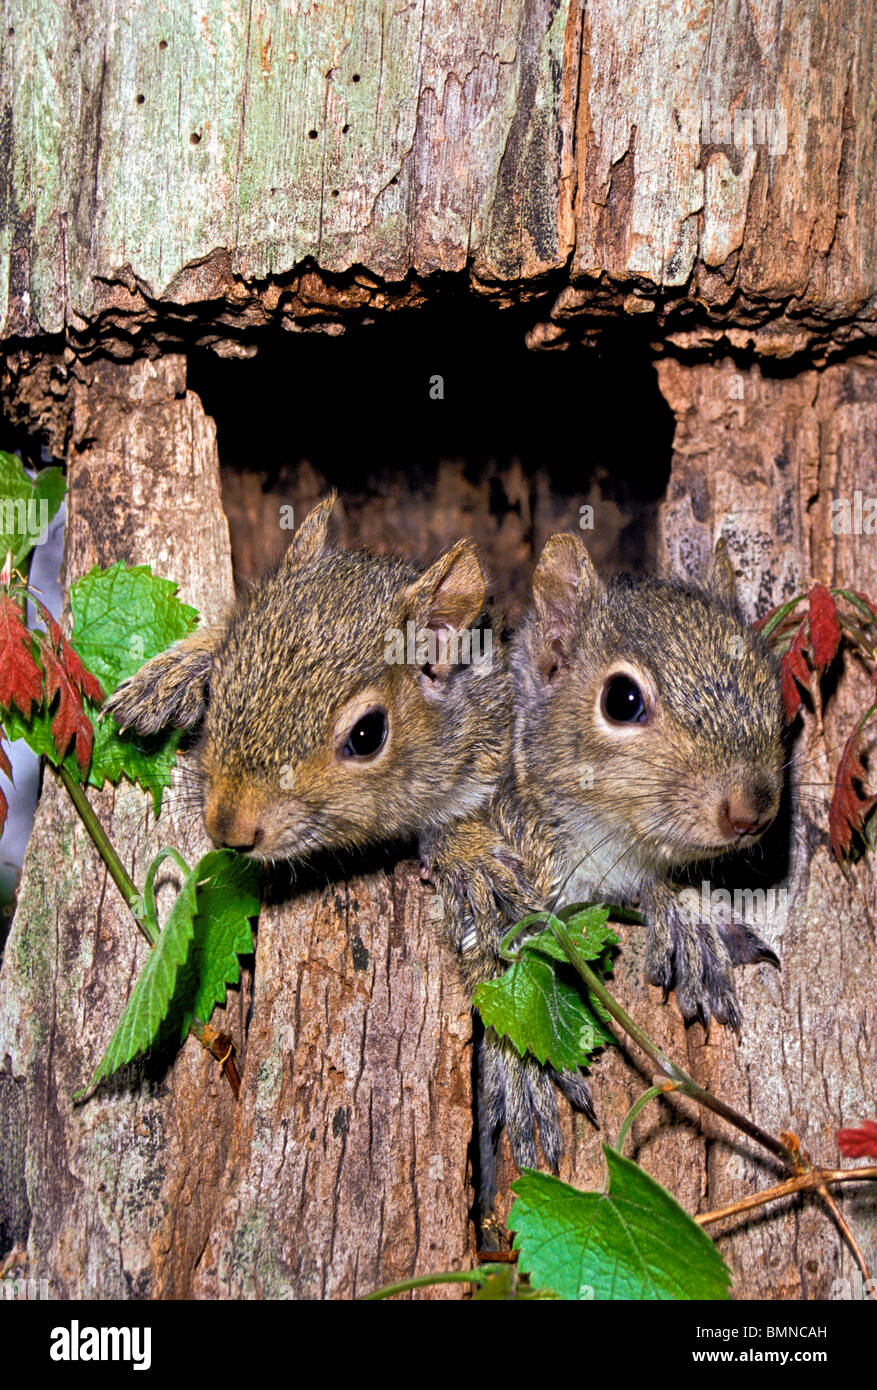 Baby Eastern gray squirrels (Sciurus carolinensis) poking their heads out of the den with oak vine, Midwest USA Stock Photo